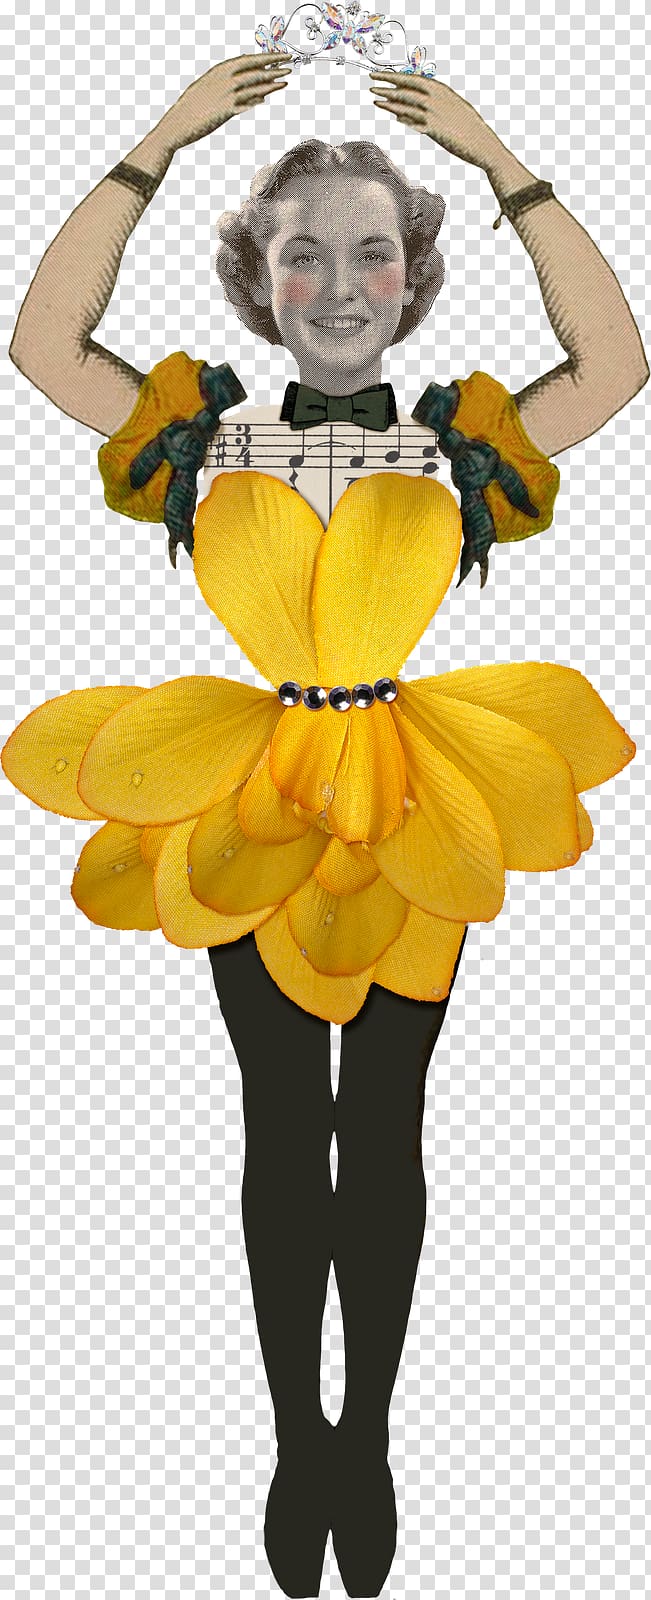 Honey bee Costume Headgear, have fun together! transparent background PNG clipart